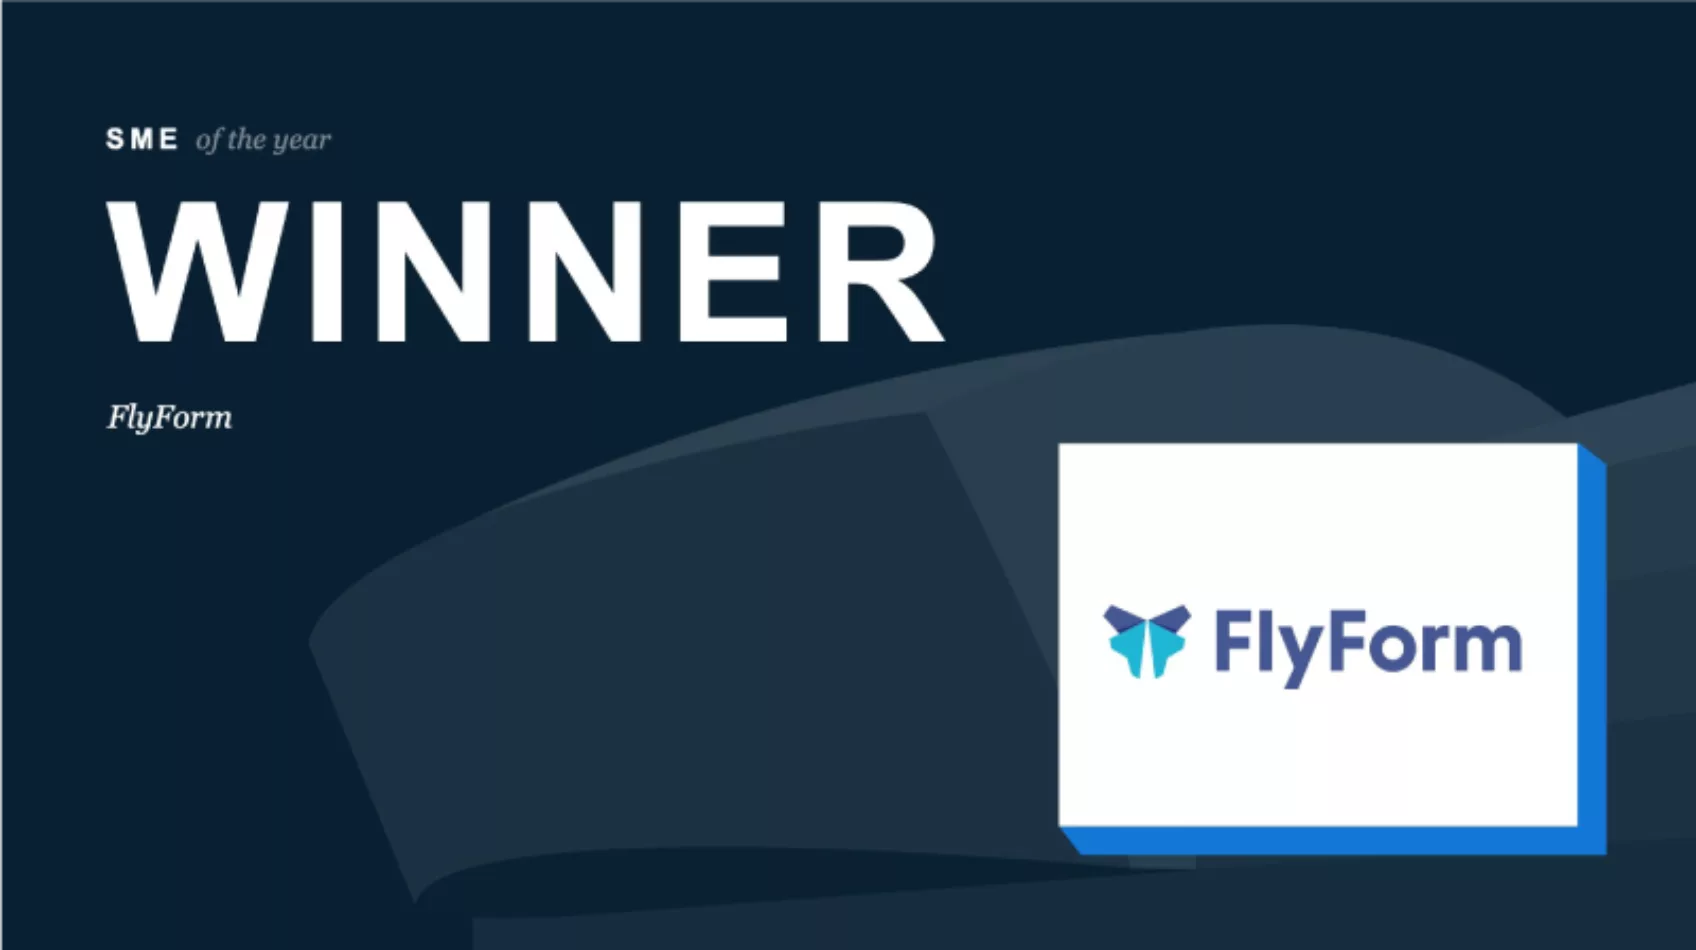 Graphic showing FlyForm as winners of the award